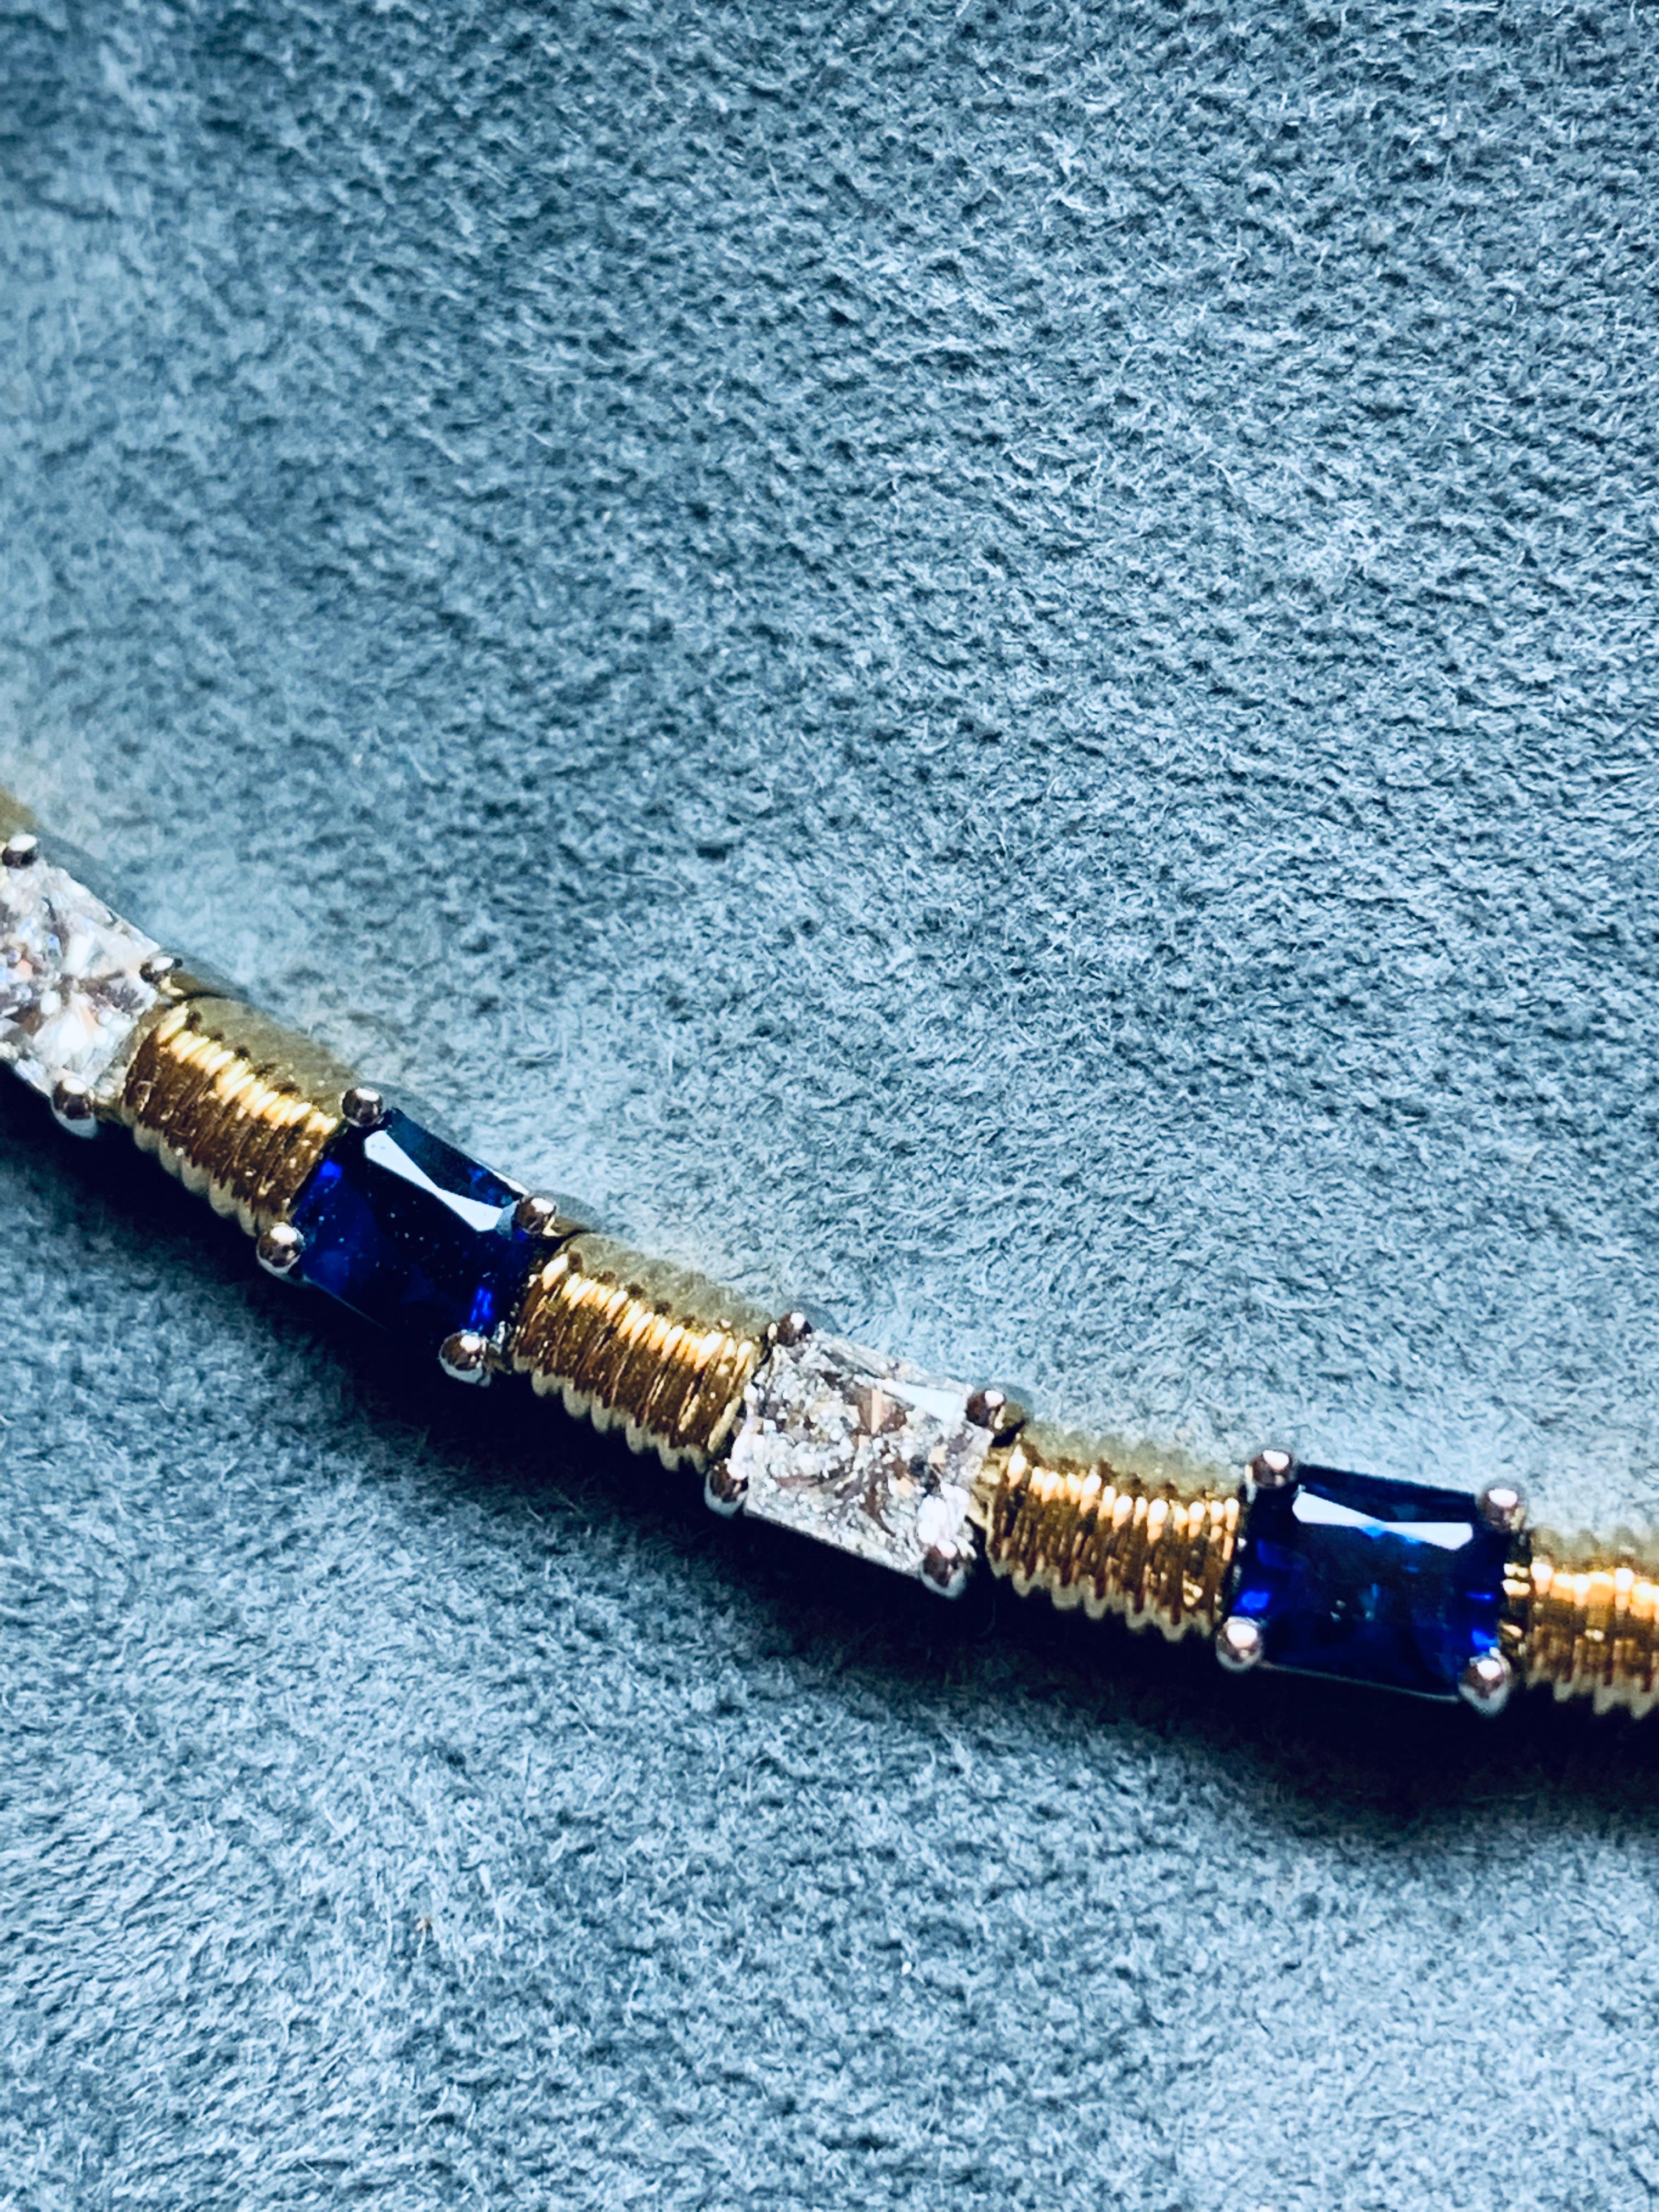 Pictures cannot do this piece justice. Set in a handmade necklace are 8 incredibly rich Emerald cut Blue Sapphires weighing 3.59 carats total and 7 Rectangular Princess cut Diamonds weighing 2.28 carats total. All stones are perfectly matched, and